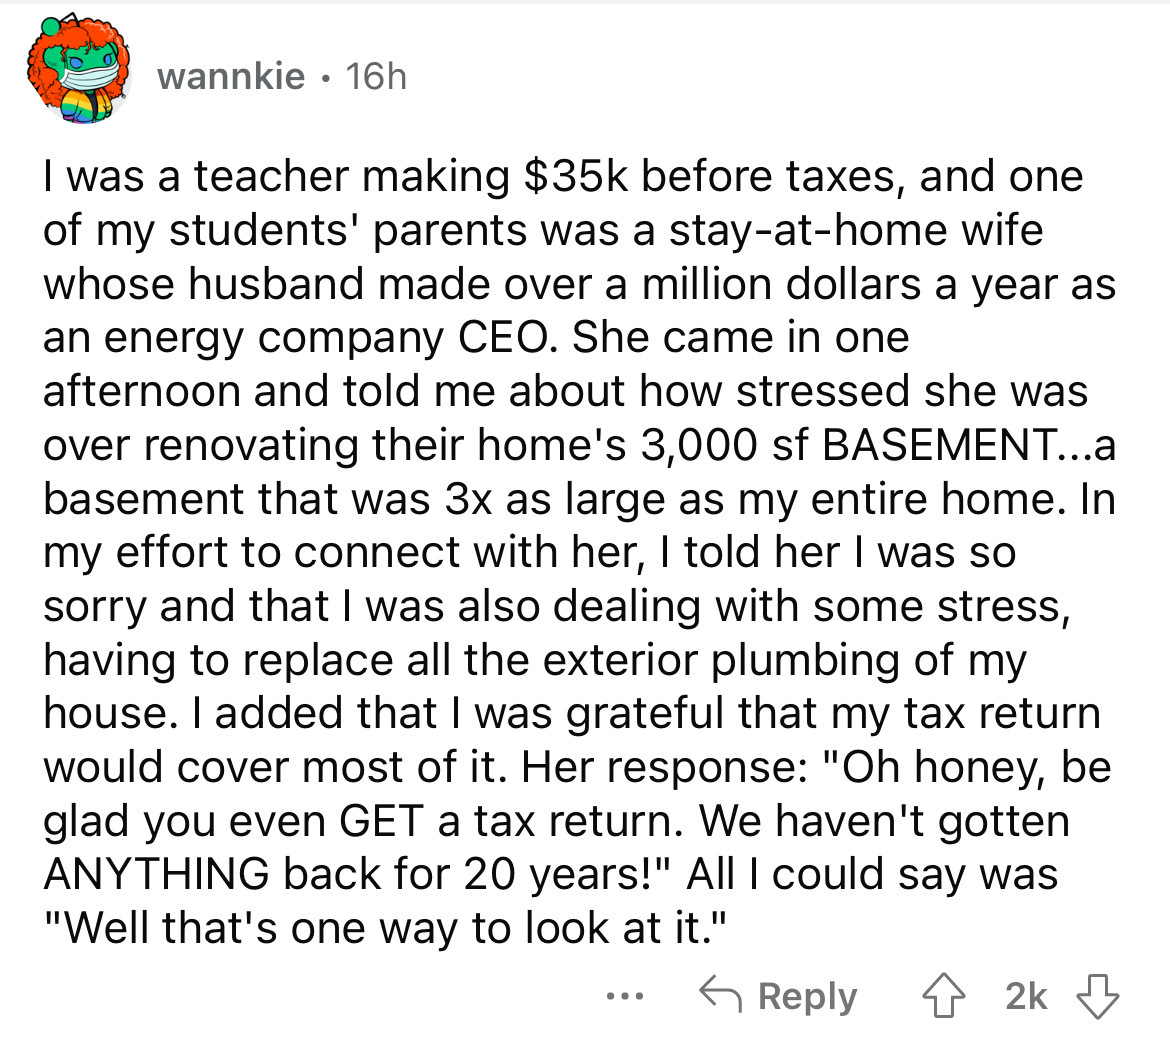 angle - wannkie 16h I was a teacher making $35k before taxes, and one of my students' parents was a stayathome wife whose husband made over a million dollars a year as an energy company Ceo. She came in one afternoon and told me about how stressed she was